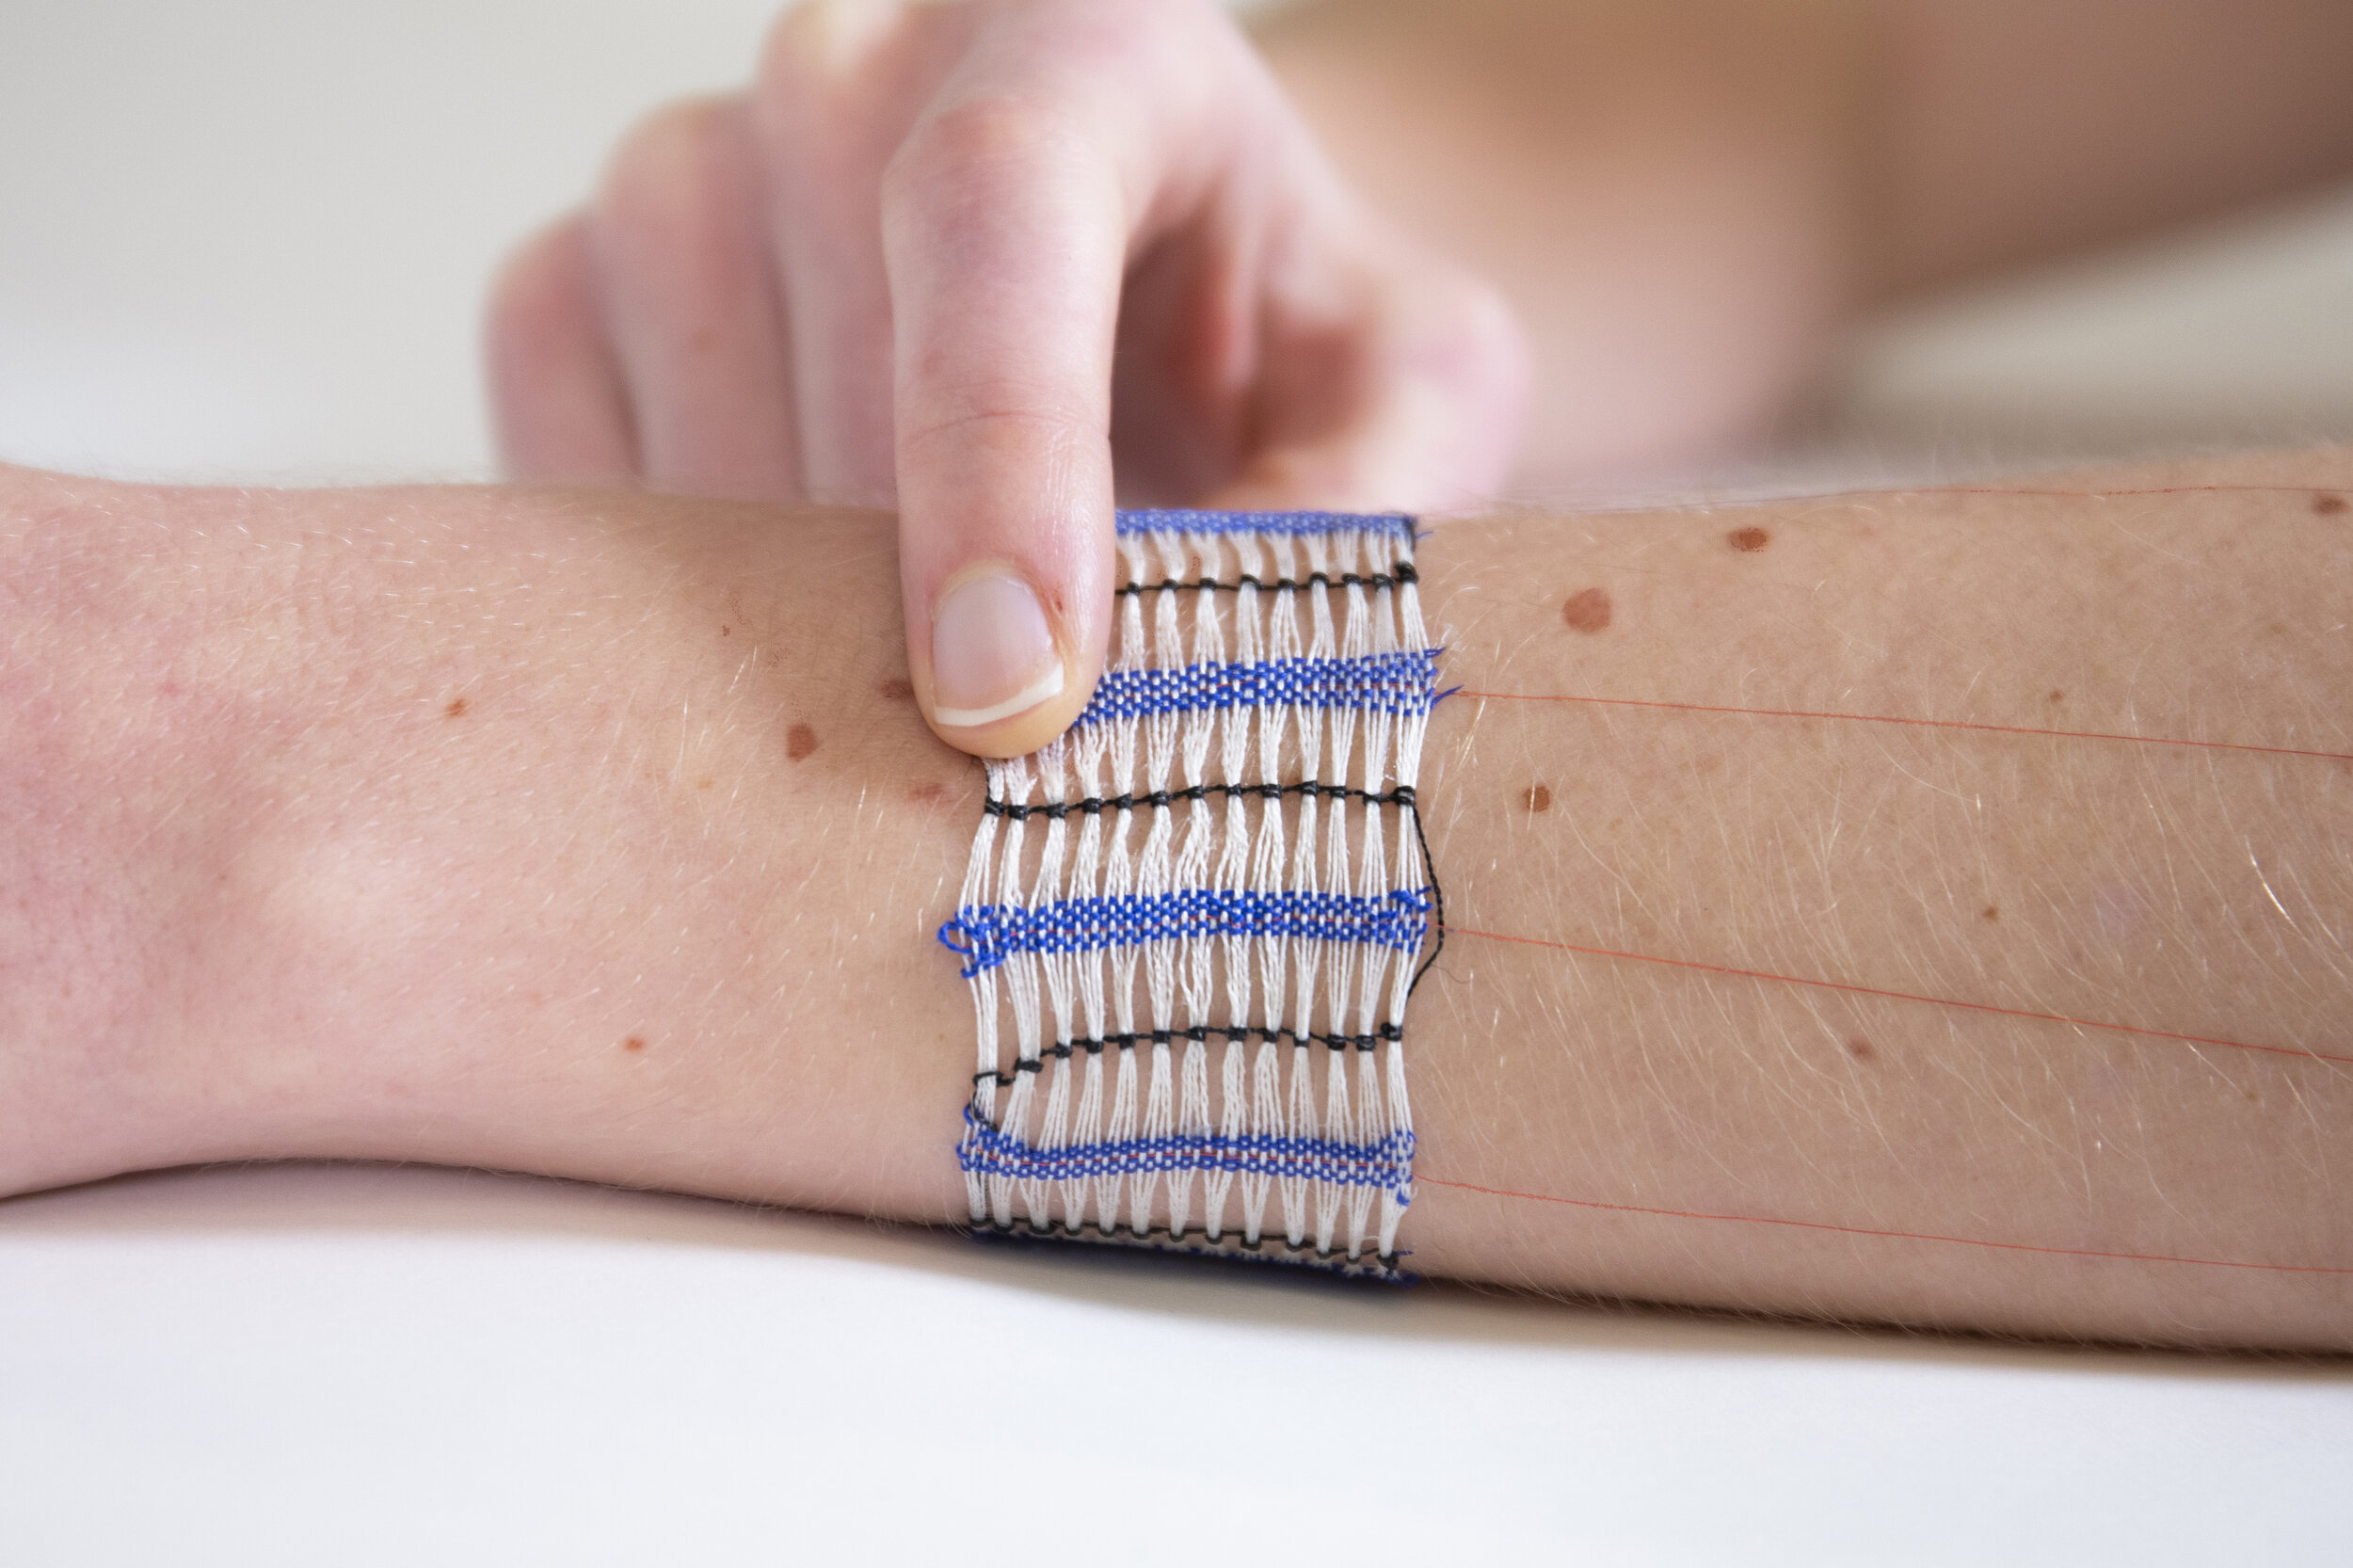  WovenSkin touch slider woven with an open space design that shows the wearer’s underlying skinmarks. (Image Credit: Hybrid Body Lab) (License: CC BY-NC-SA 4.0) 